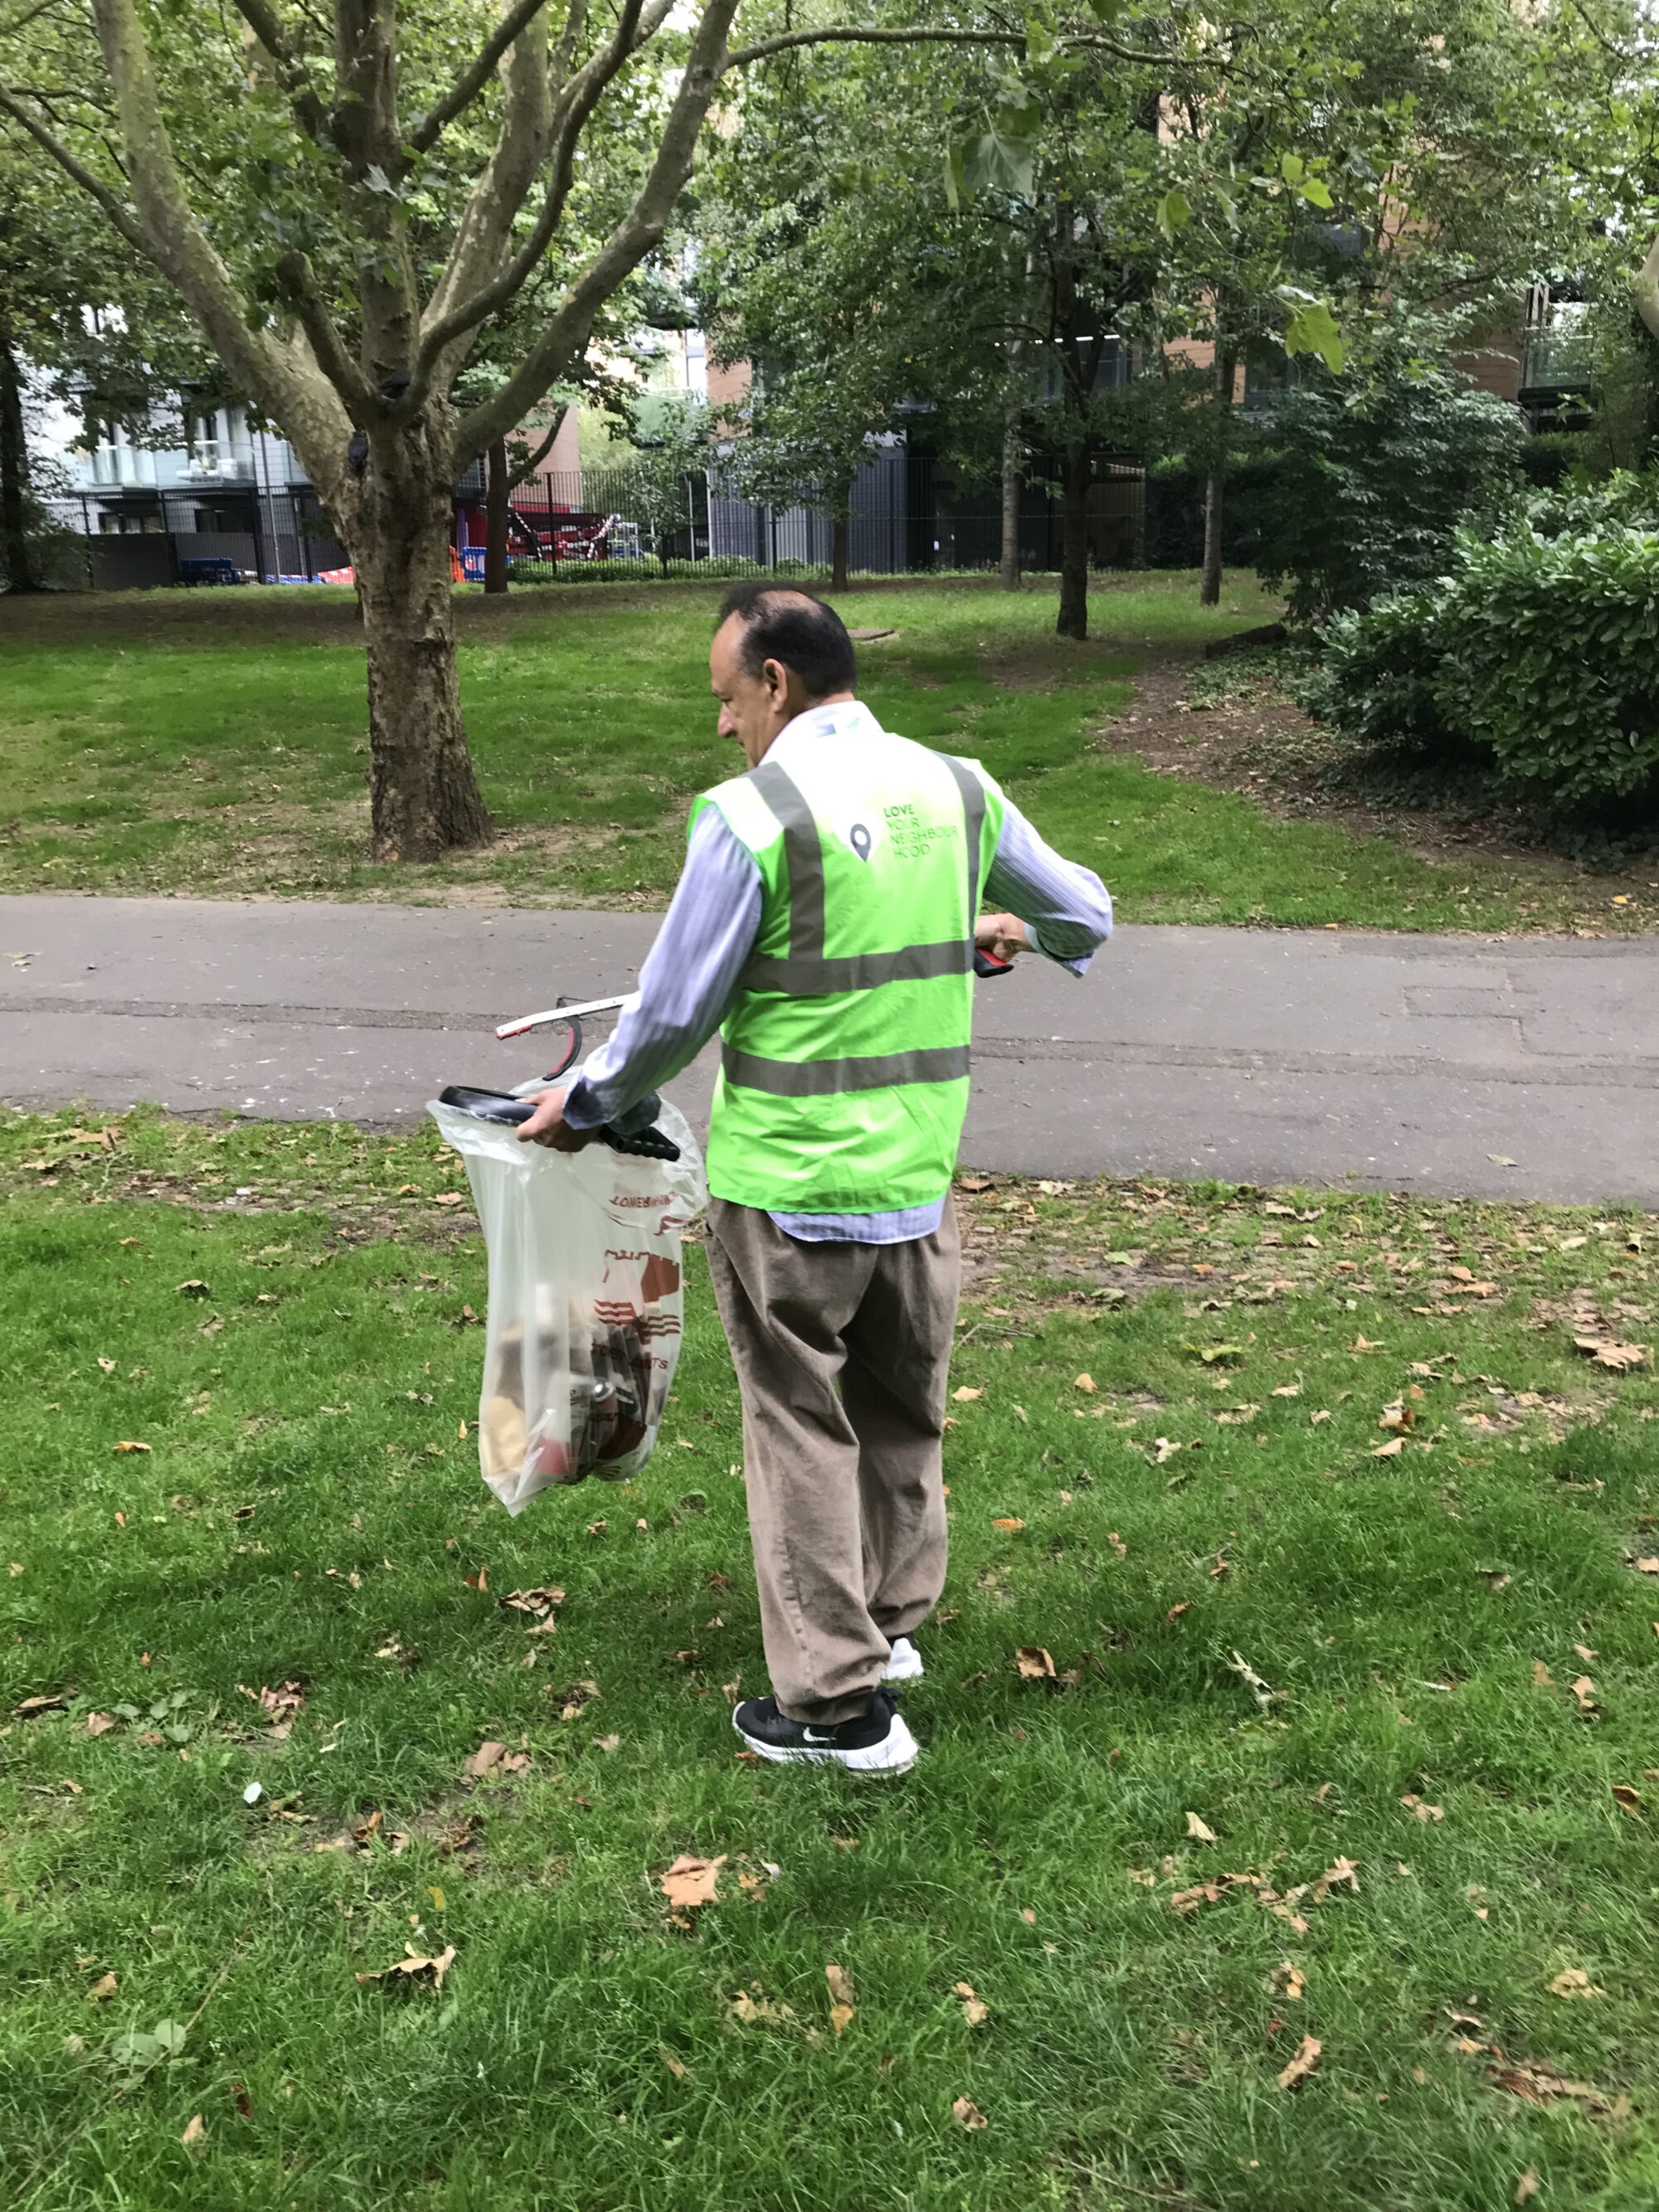 Abdul picking up litter in the park.